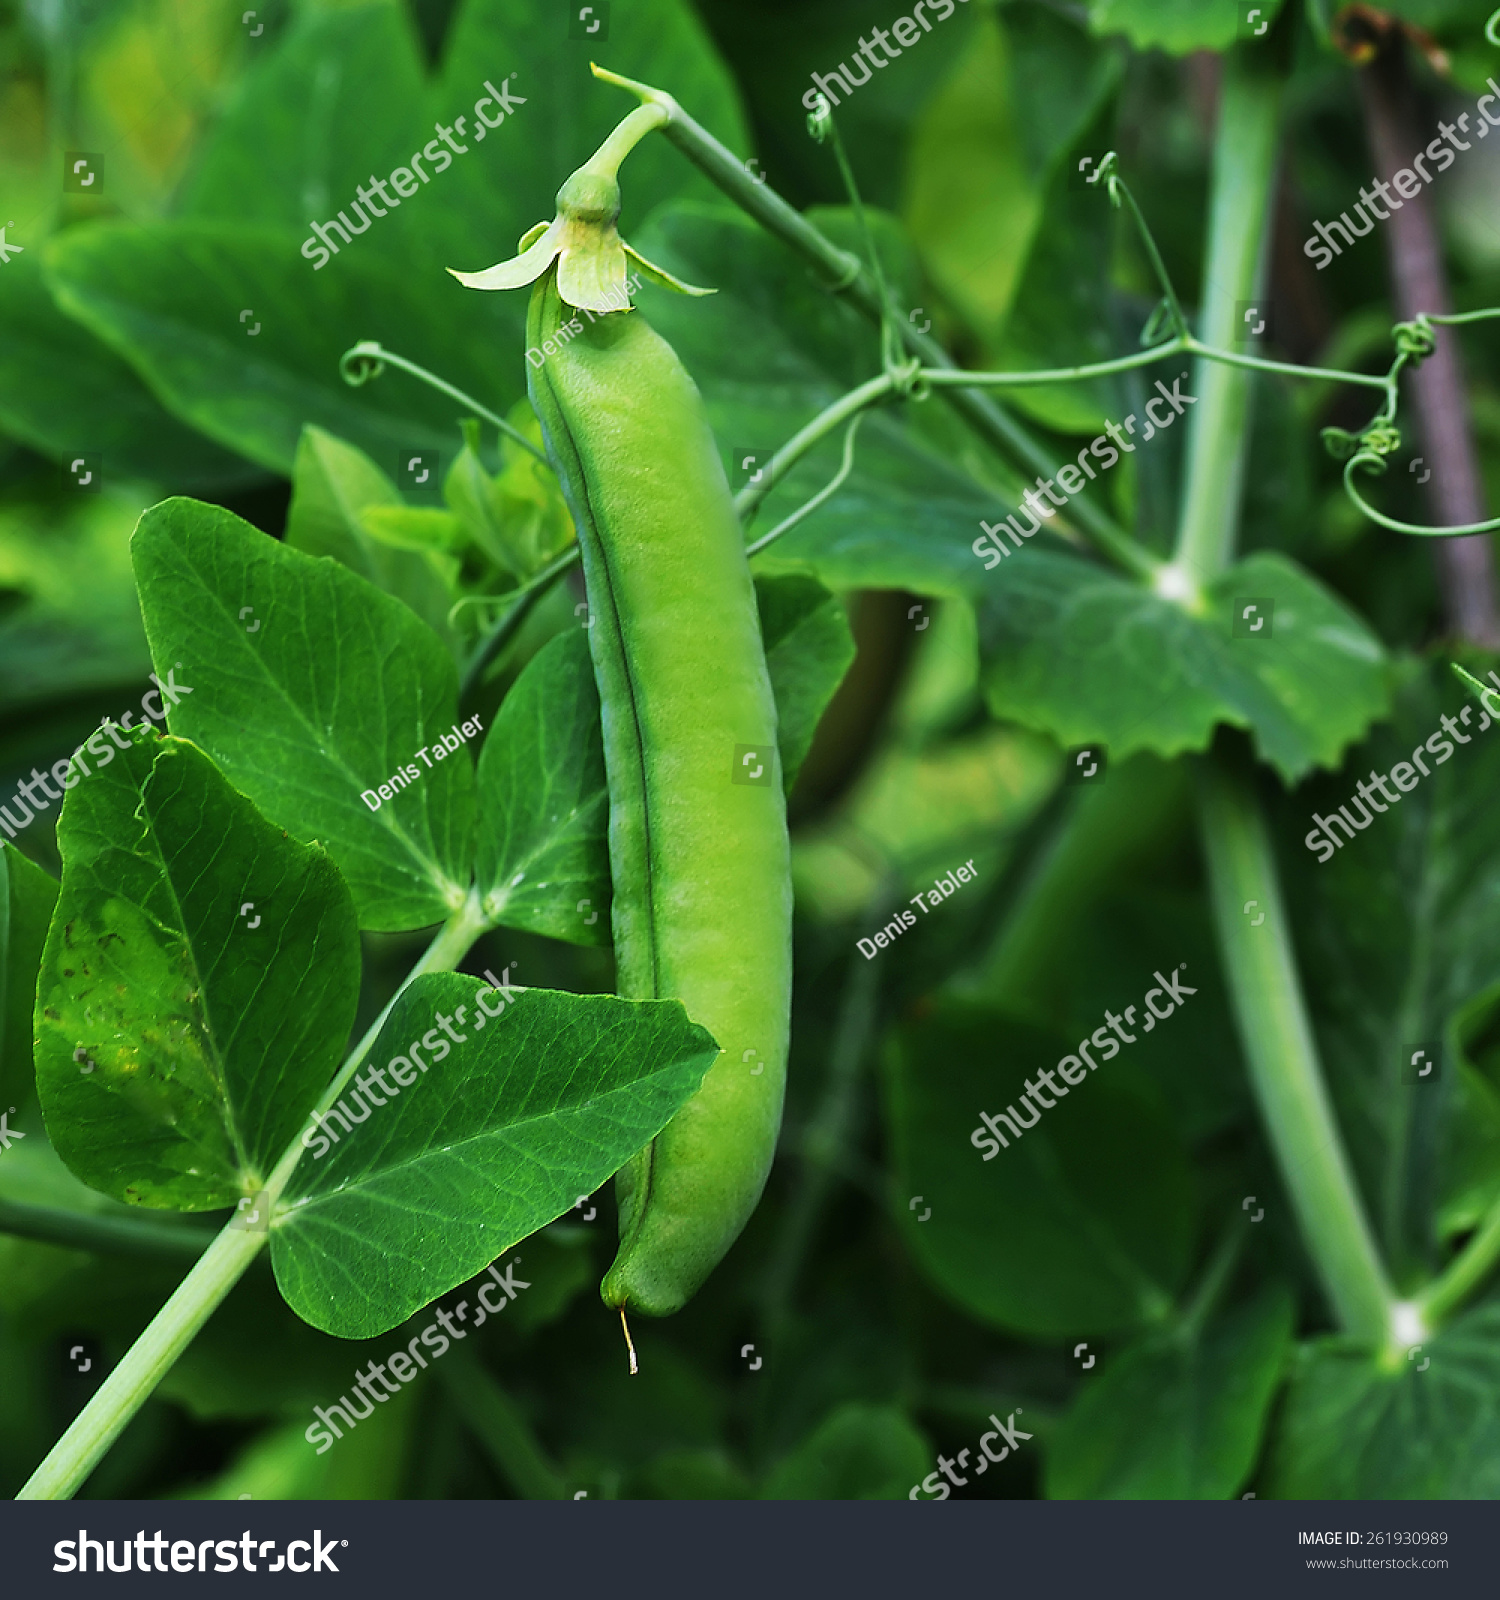 Plant Of Pea Growing In Garden. Pods Peas Stock Photo 261930989 ...